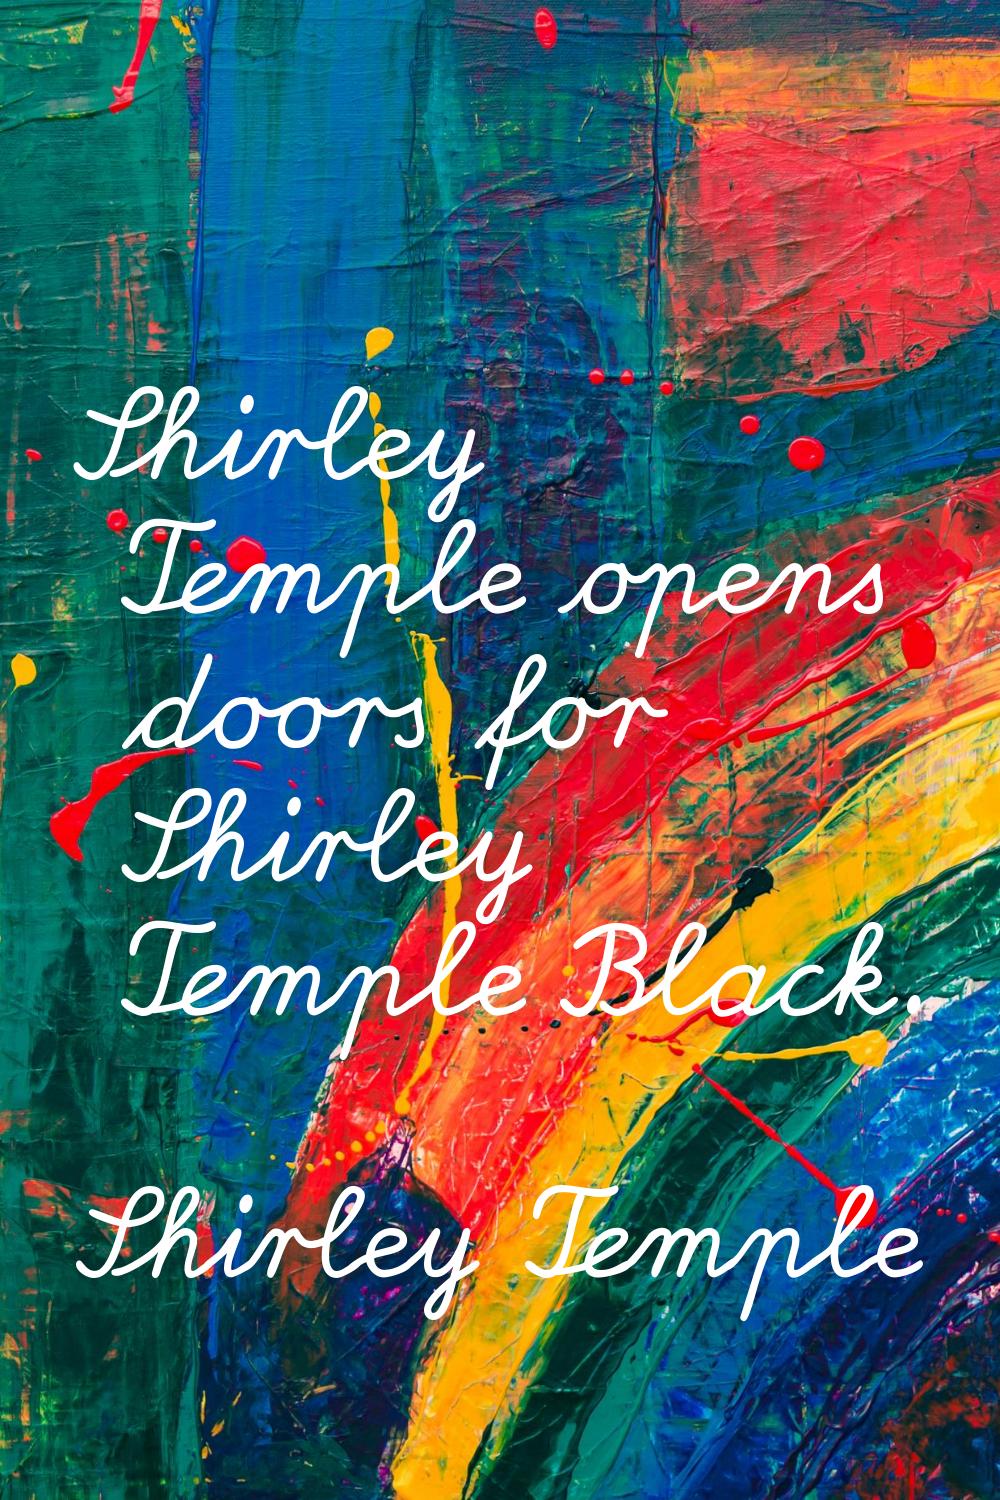 Shirley Temple opens doors for Shirley Temple Black.